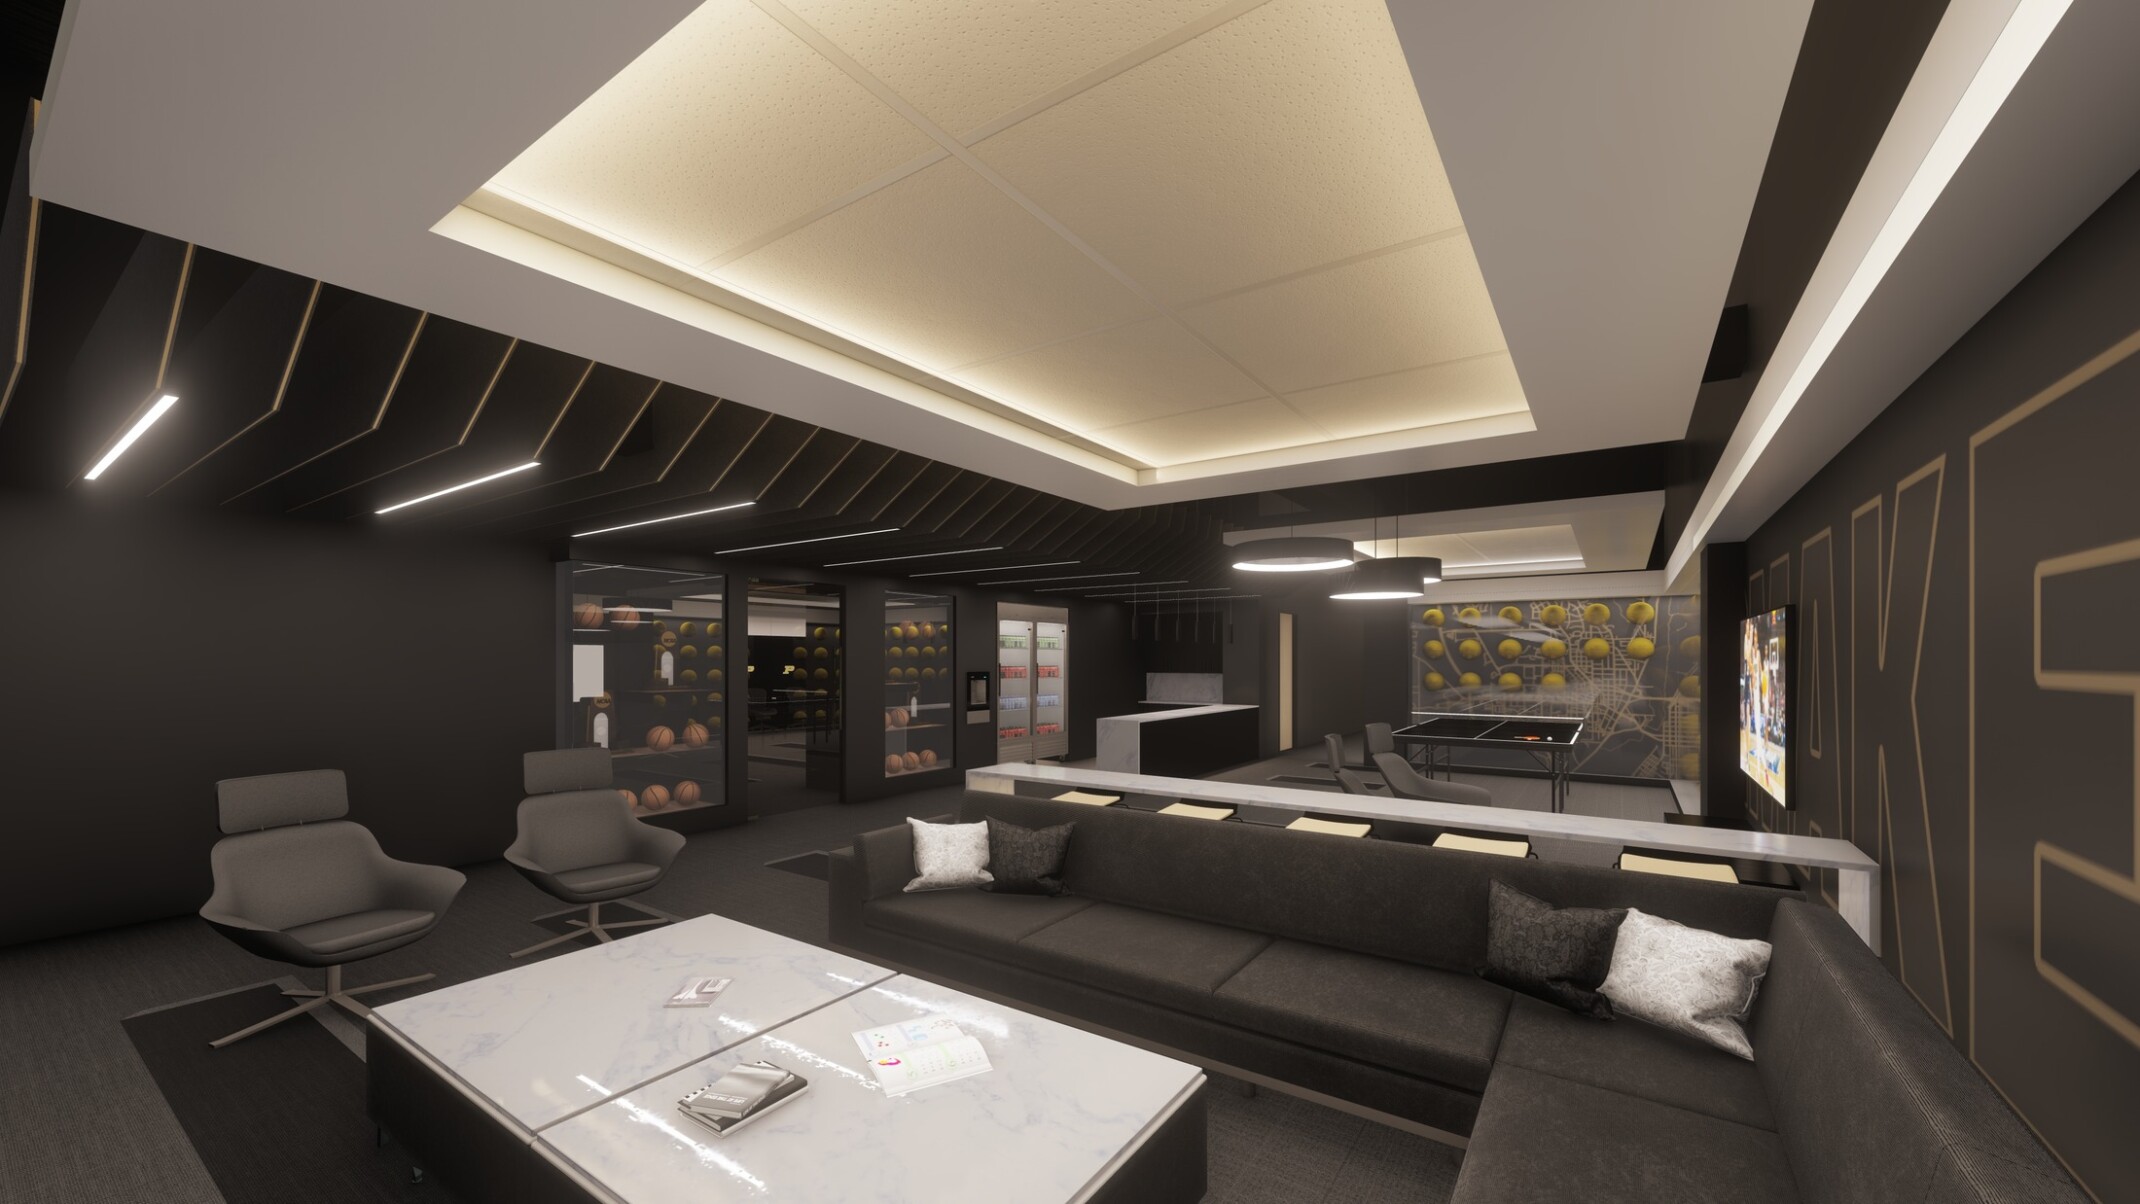 lounge in Purdue University Basketball facility with illuminated recessed ceiling accent over mixed comfortable seating area, basketball rack decorative motif on walls